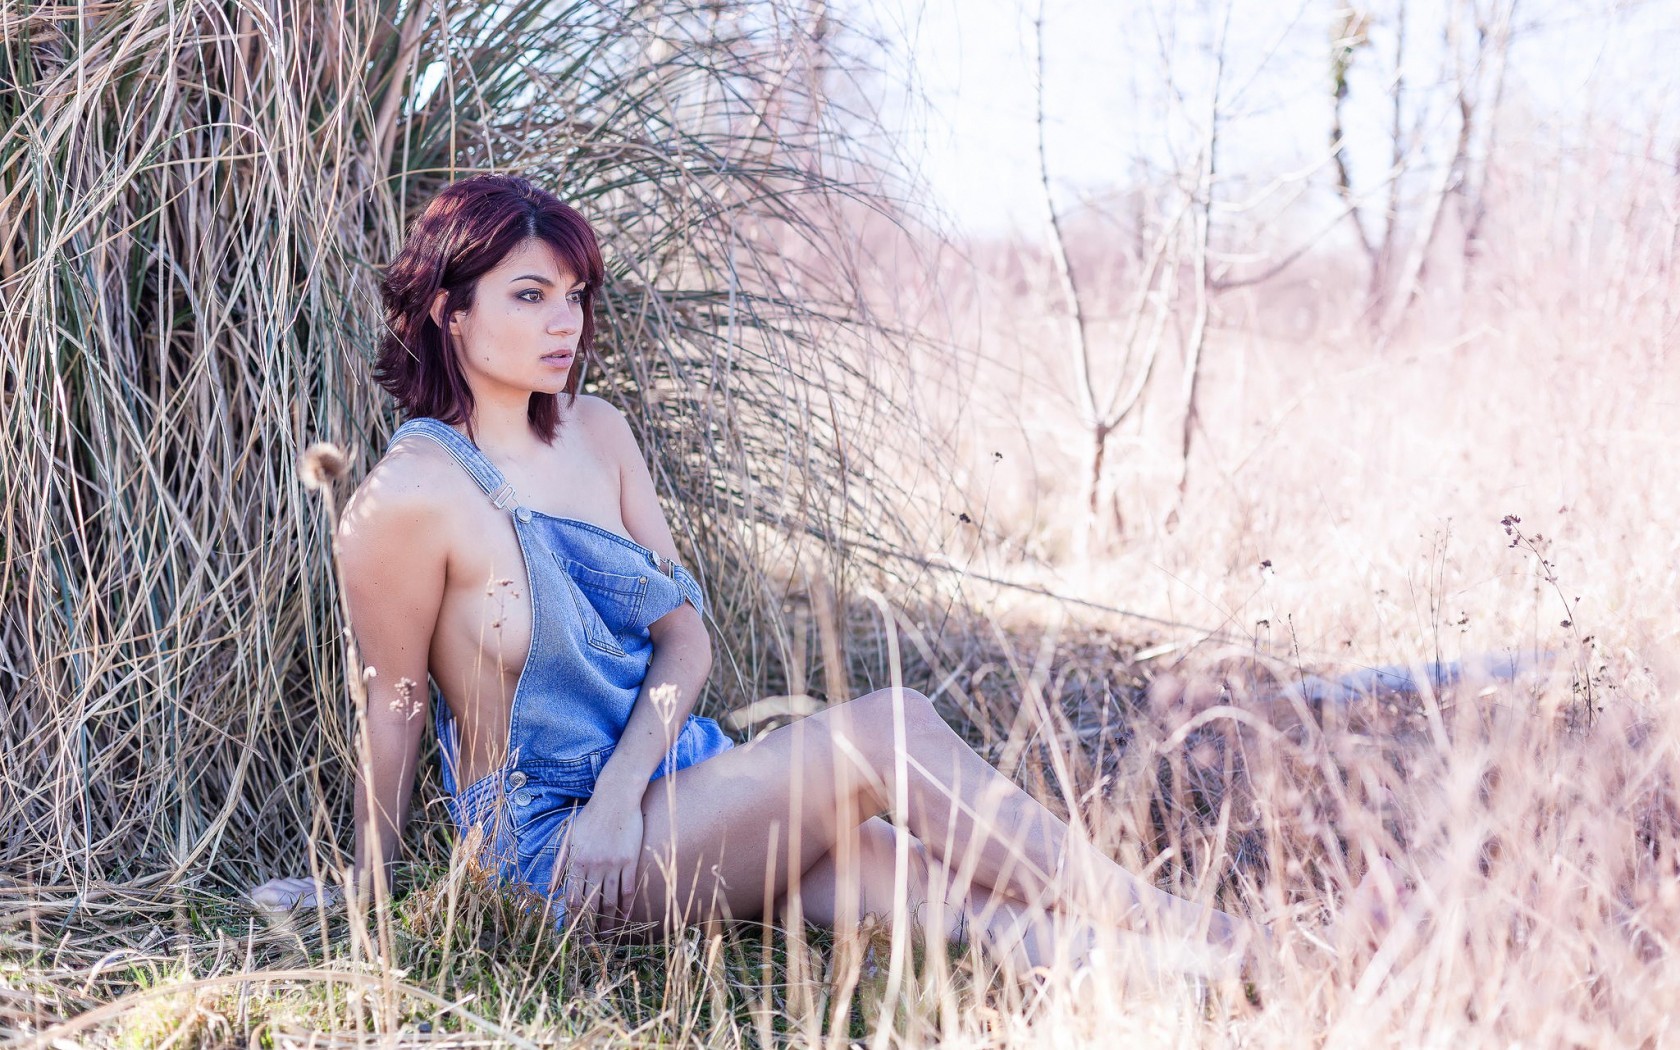 women outdoors, women, model, sideboob, dyed hair, sitting, overalls,  plants, boobs, outdoors, makeup, nature